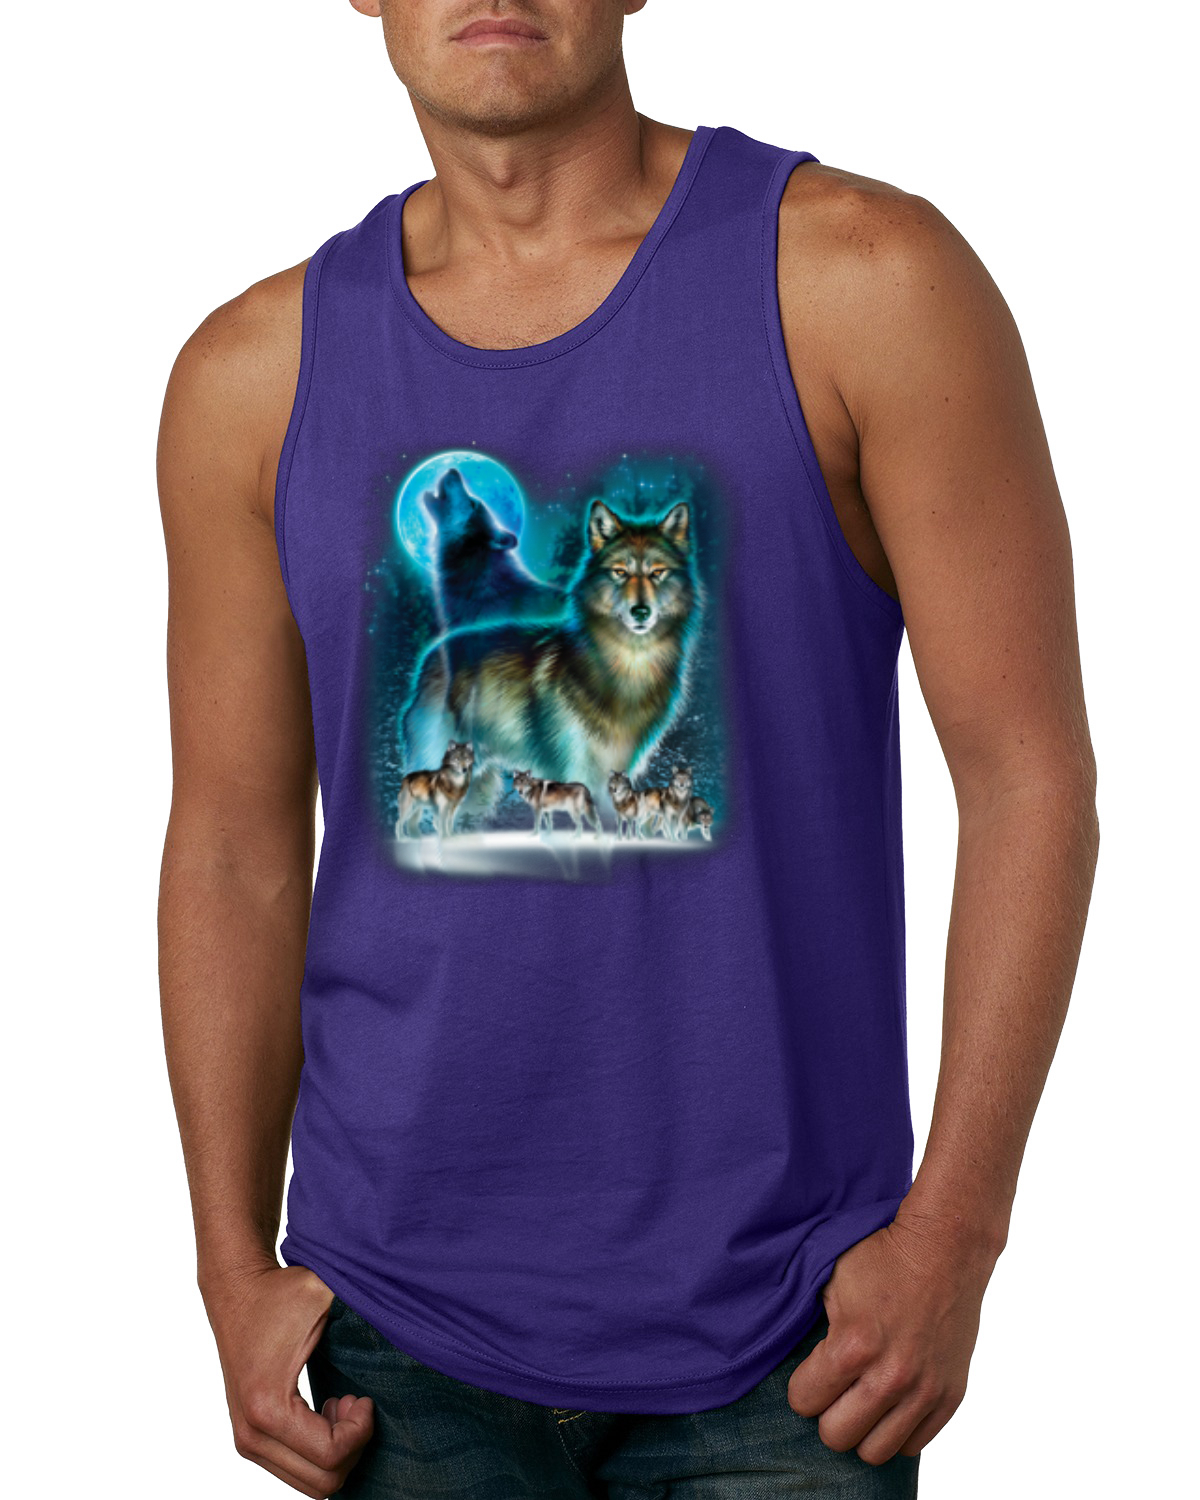 Wolf Howling At the Full Moon Wolf Pack Animal Lover Mens Graphic Tank Top, Purple, X-Large - image 1 of 3